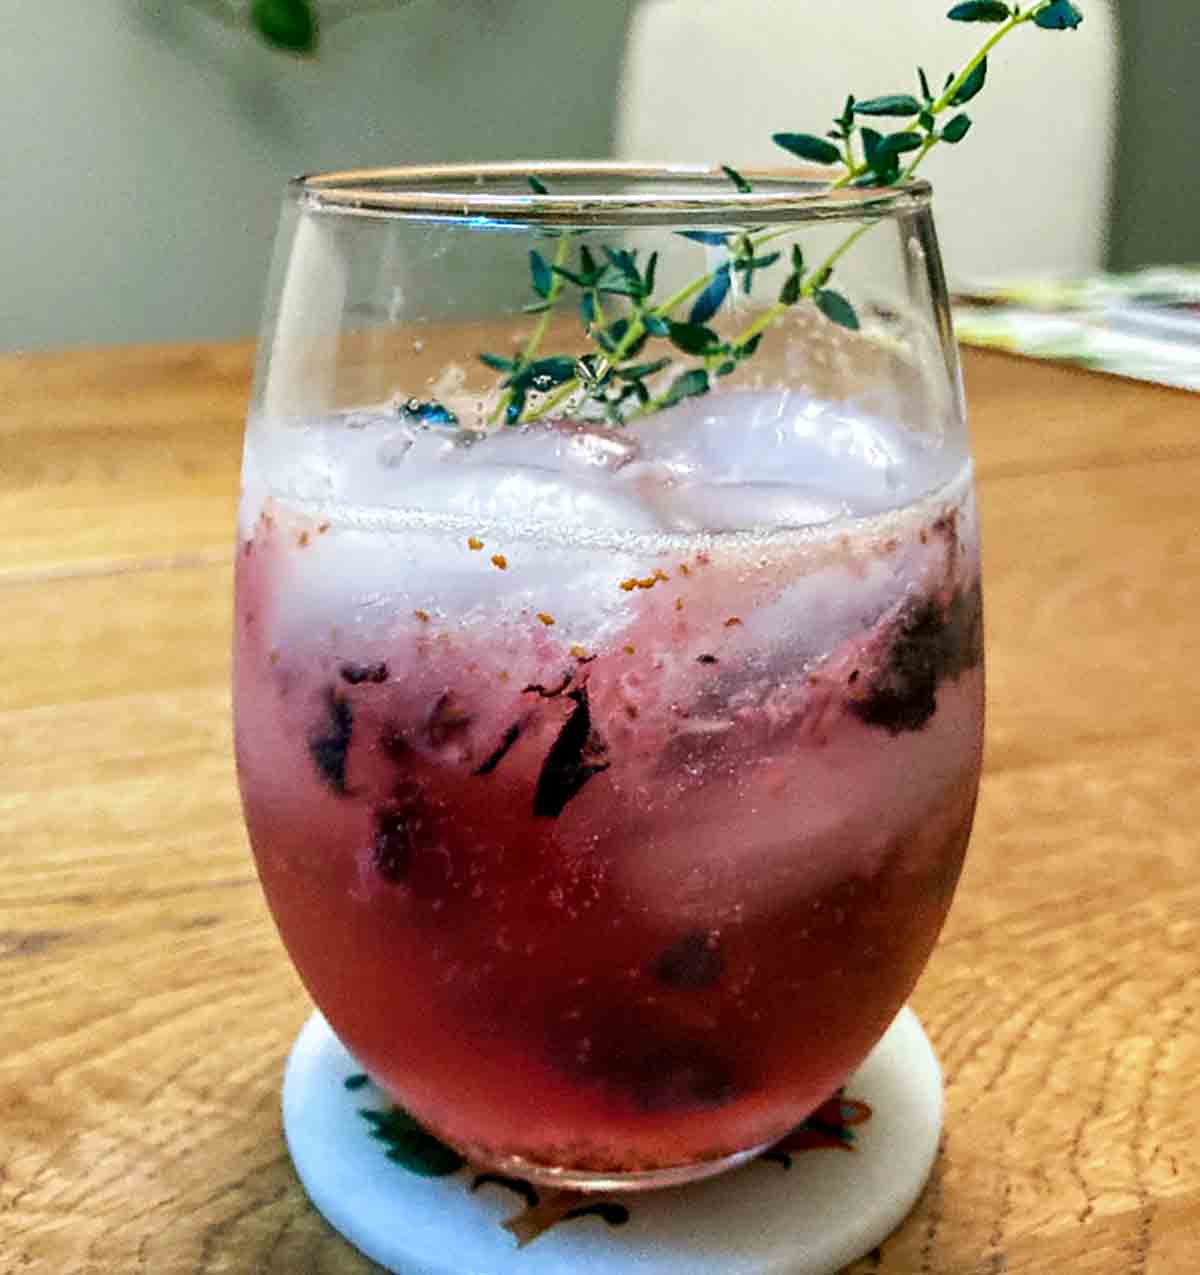 A glass of blueberry prosecco spritz with sprigs of thyme for garnish.